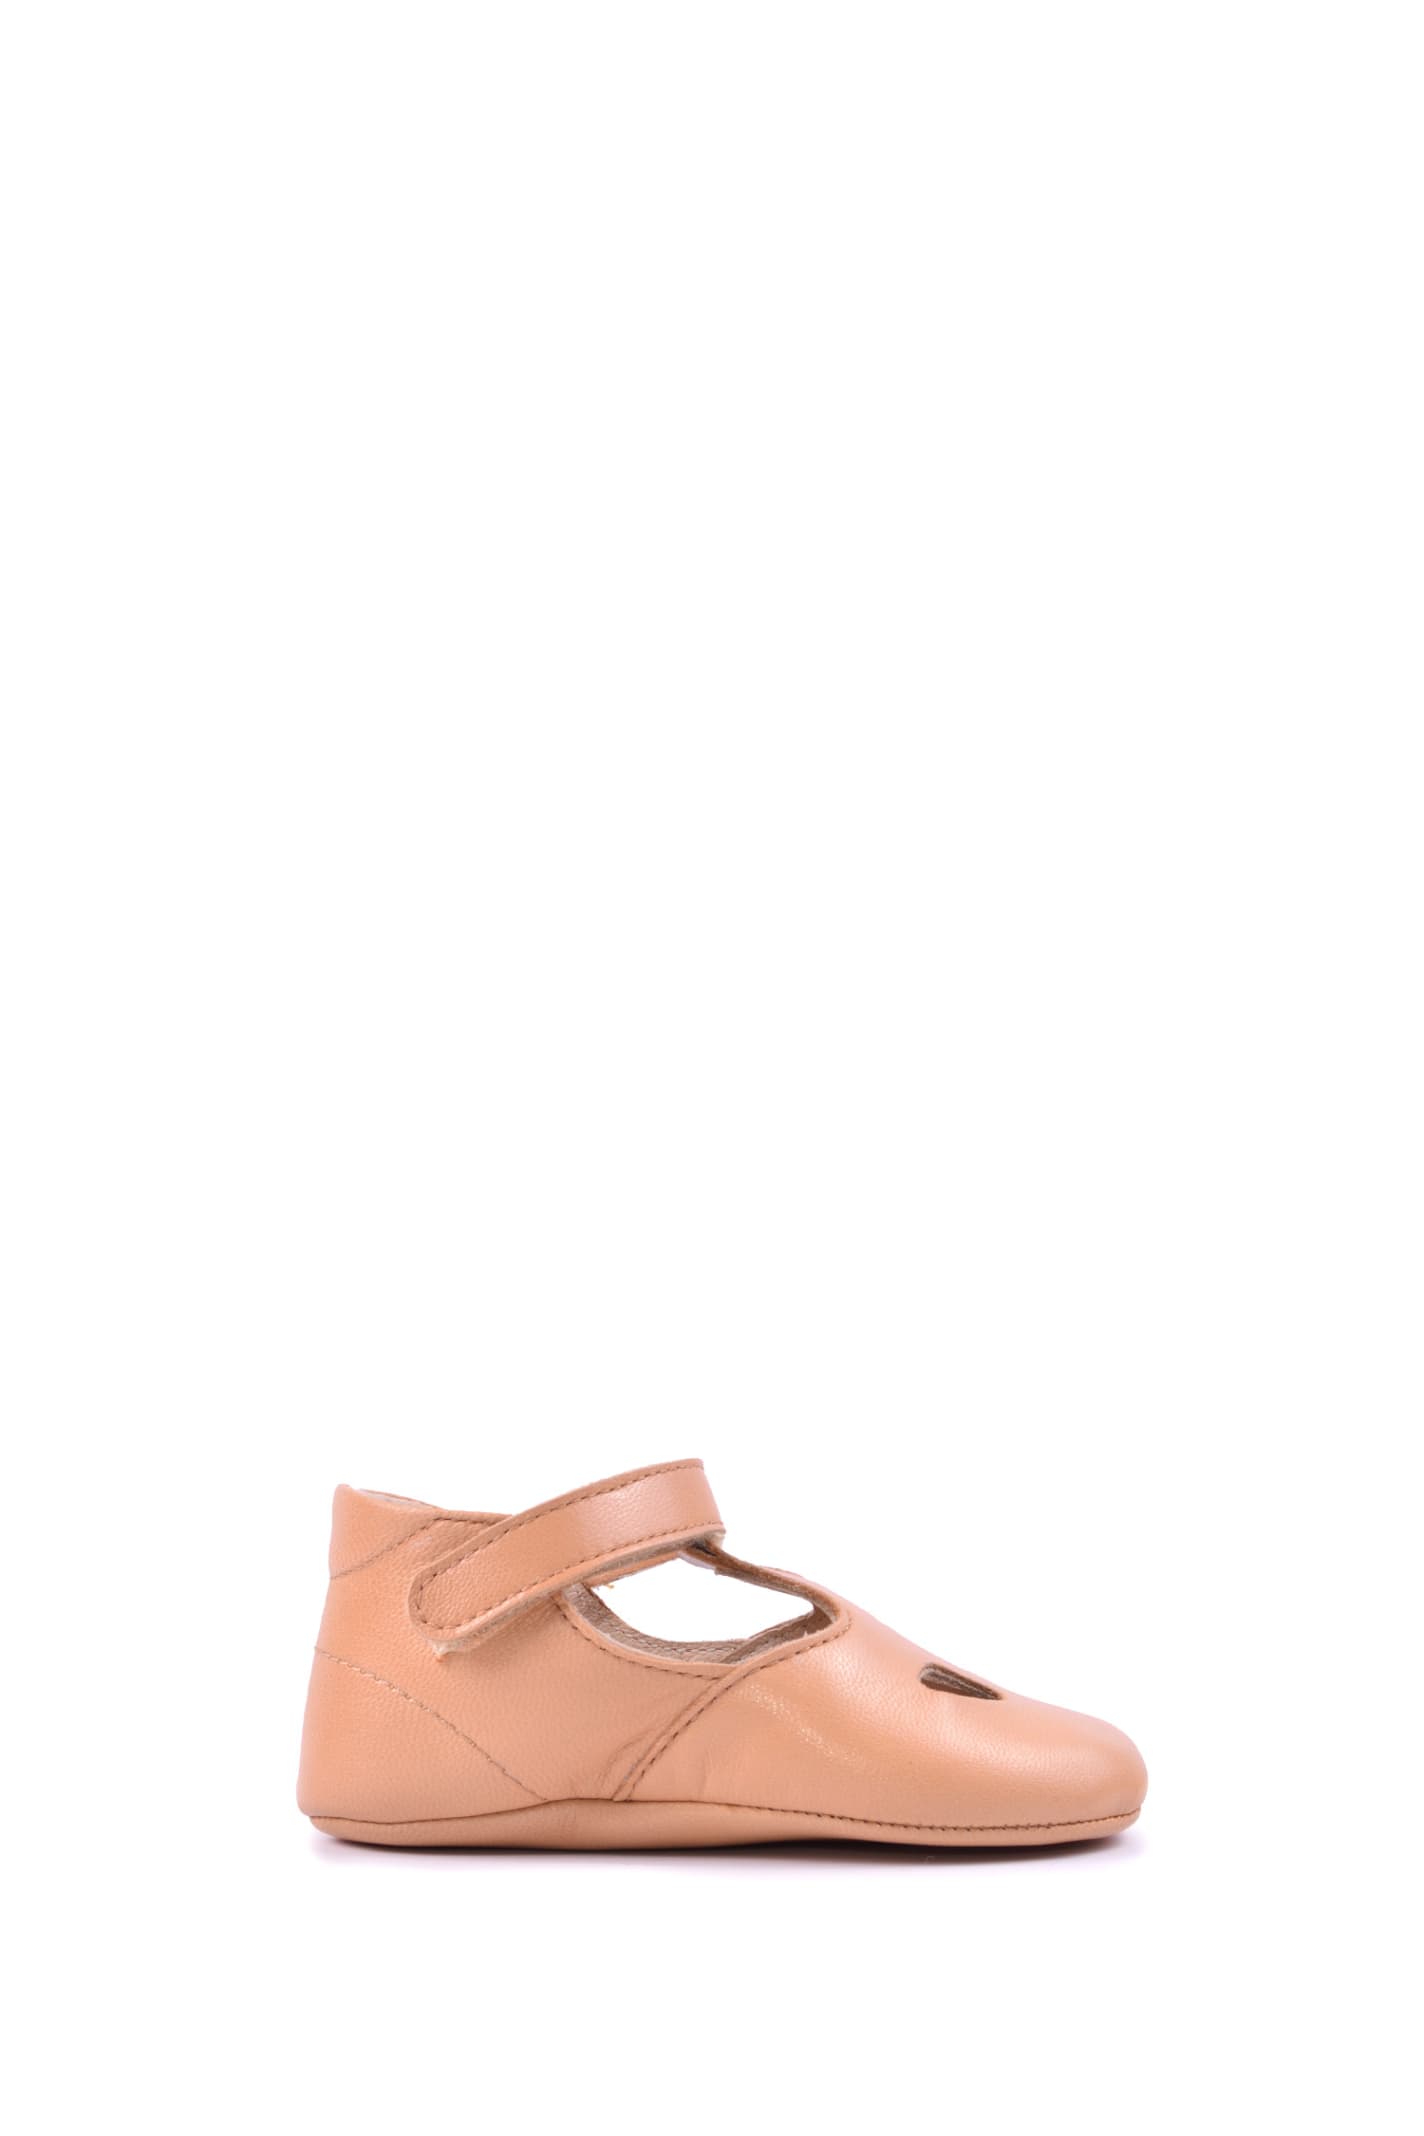 Gallucci Kids' Leather Shoes With Buckle In Beige